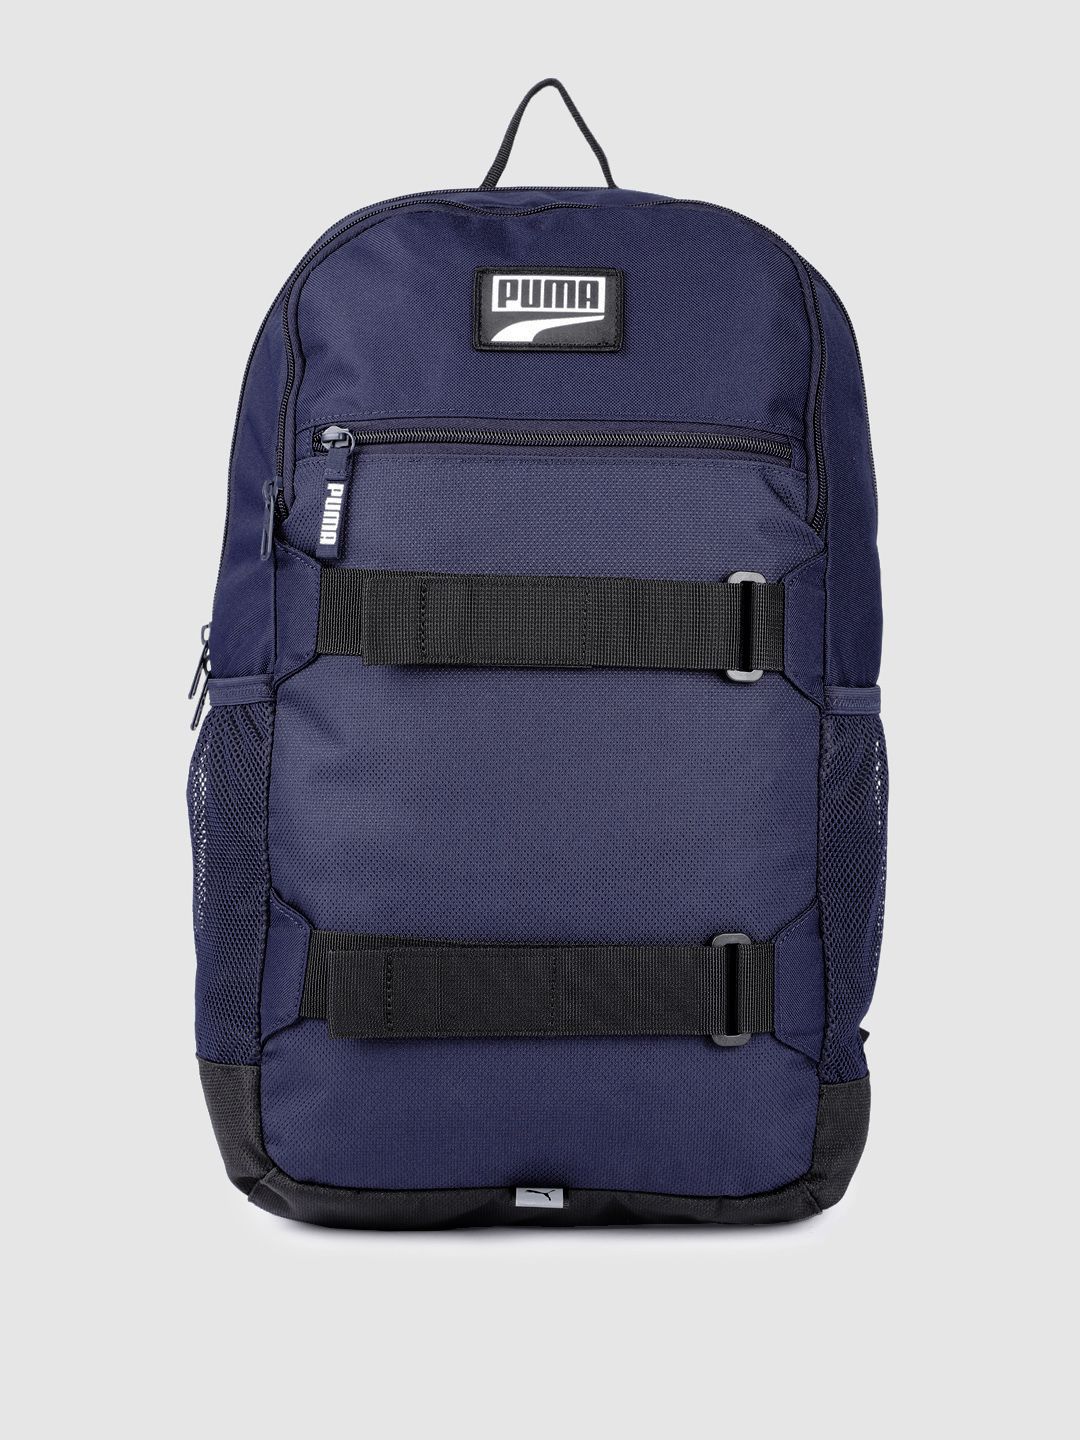 Puma Unisex Blue Solid Backpack Price in India